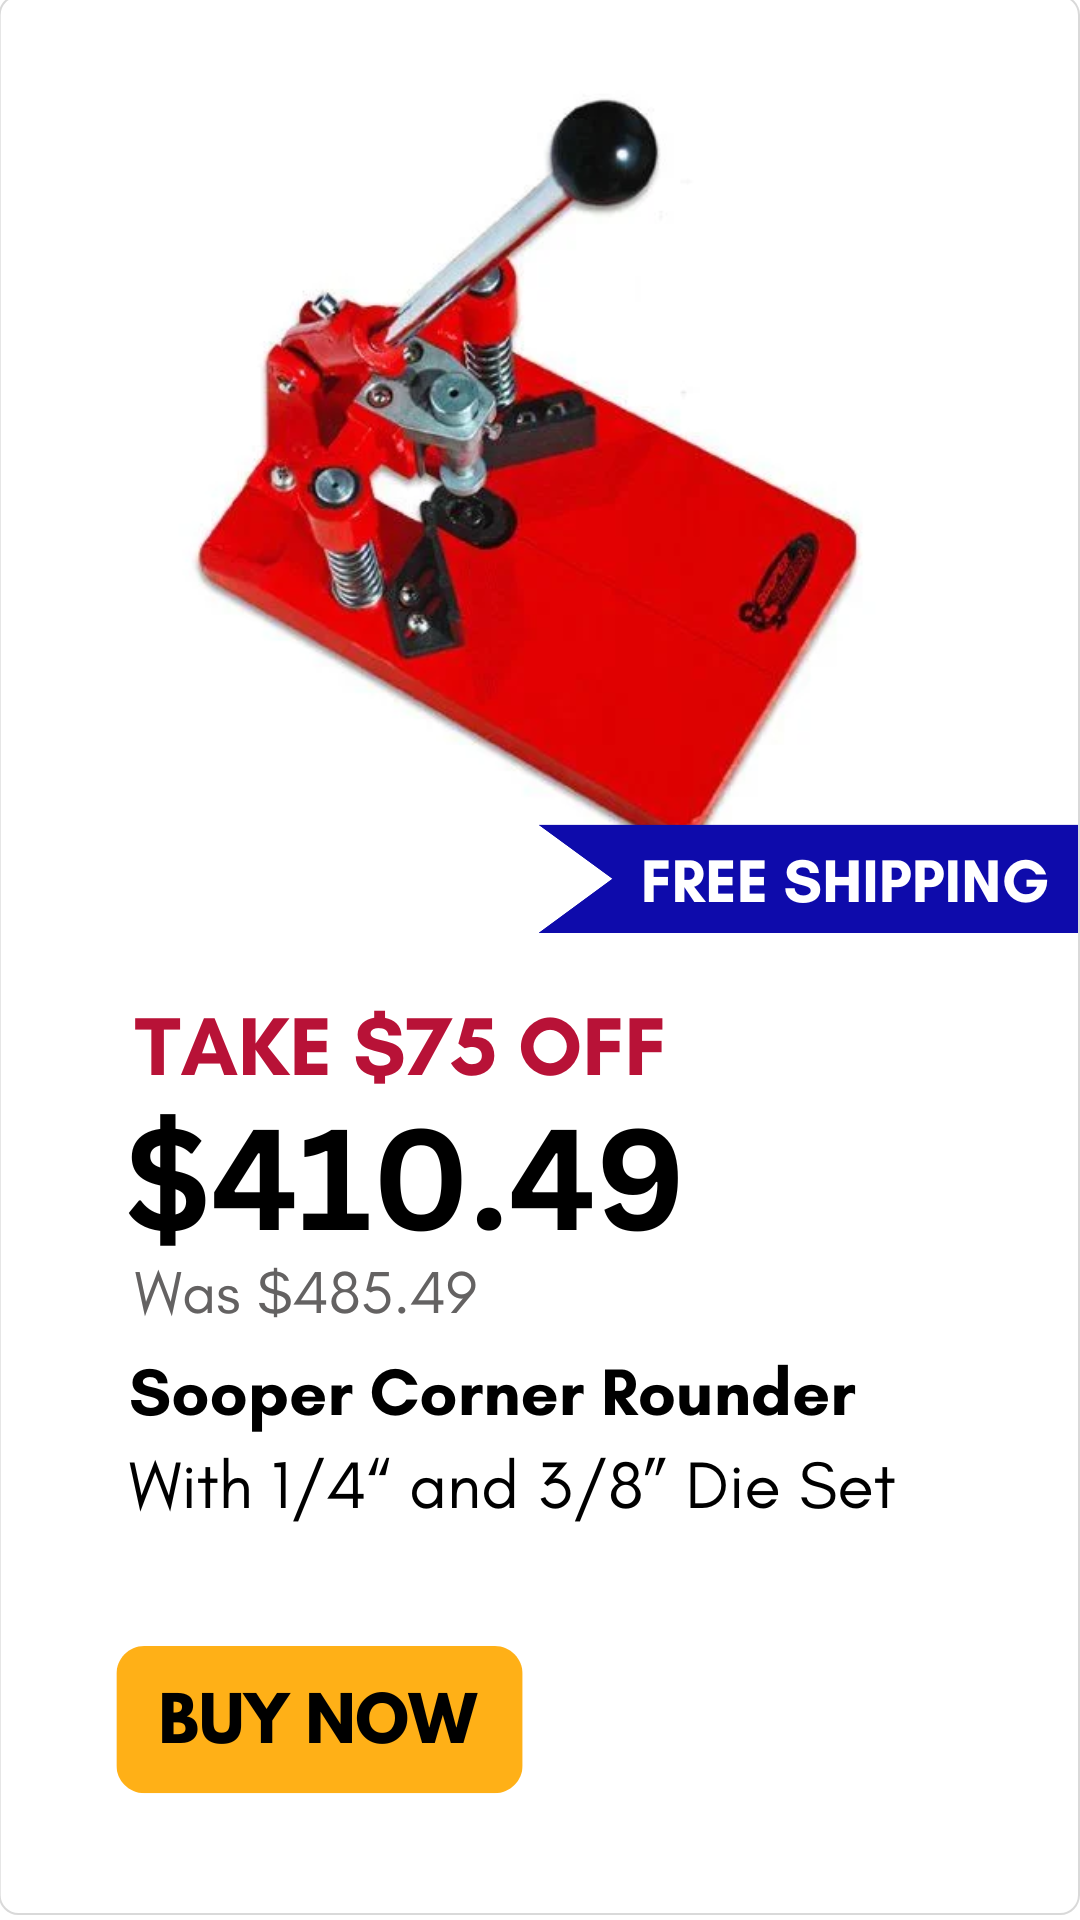 Sooper Corner Rounder with 1/4" and 3/8" die set on sale for $75 off on mybinding.com